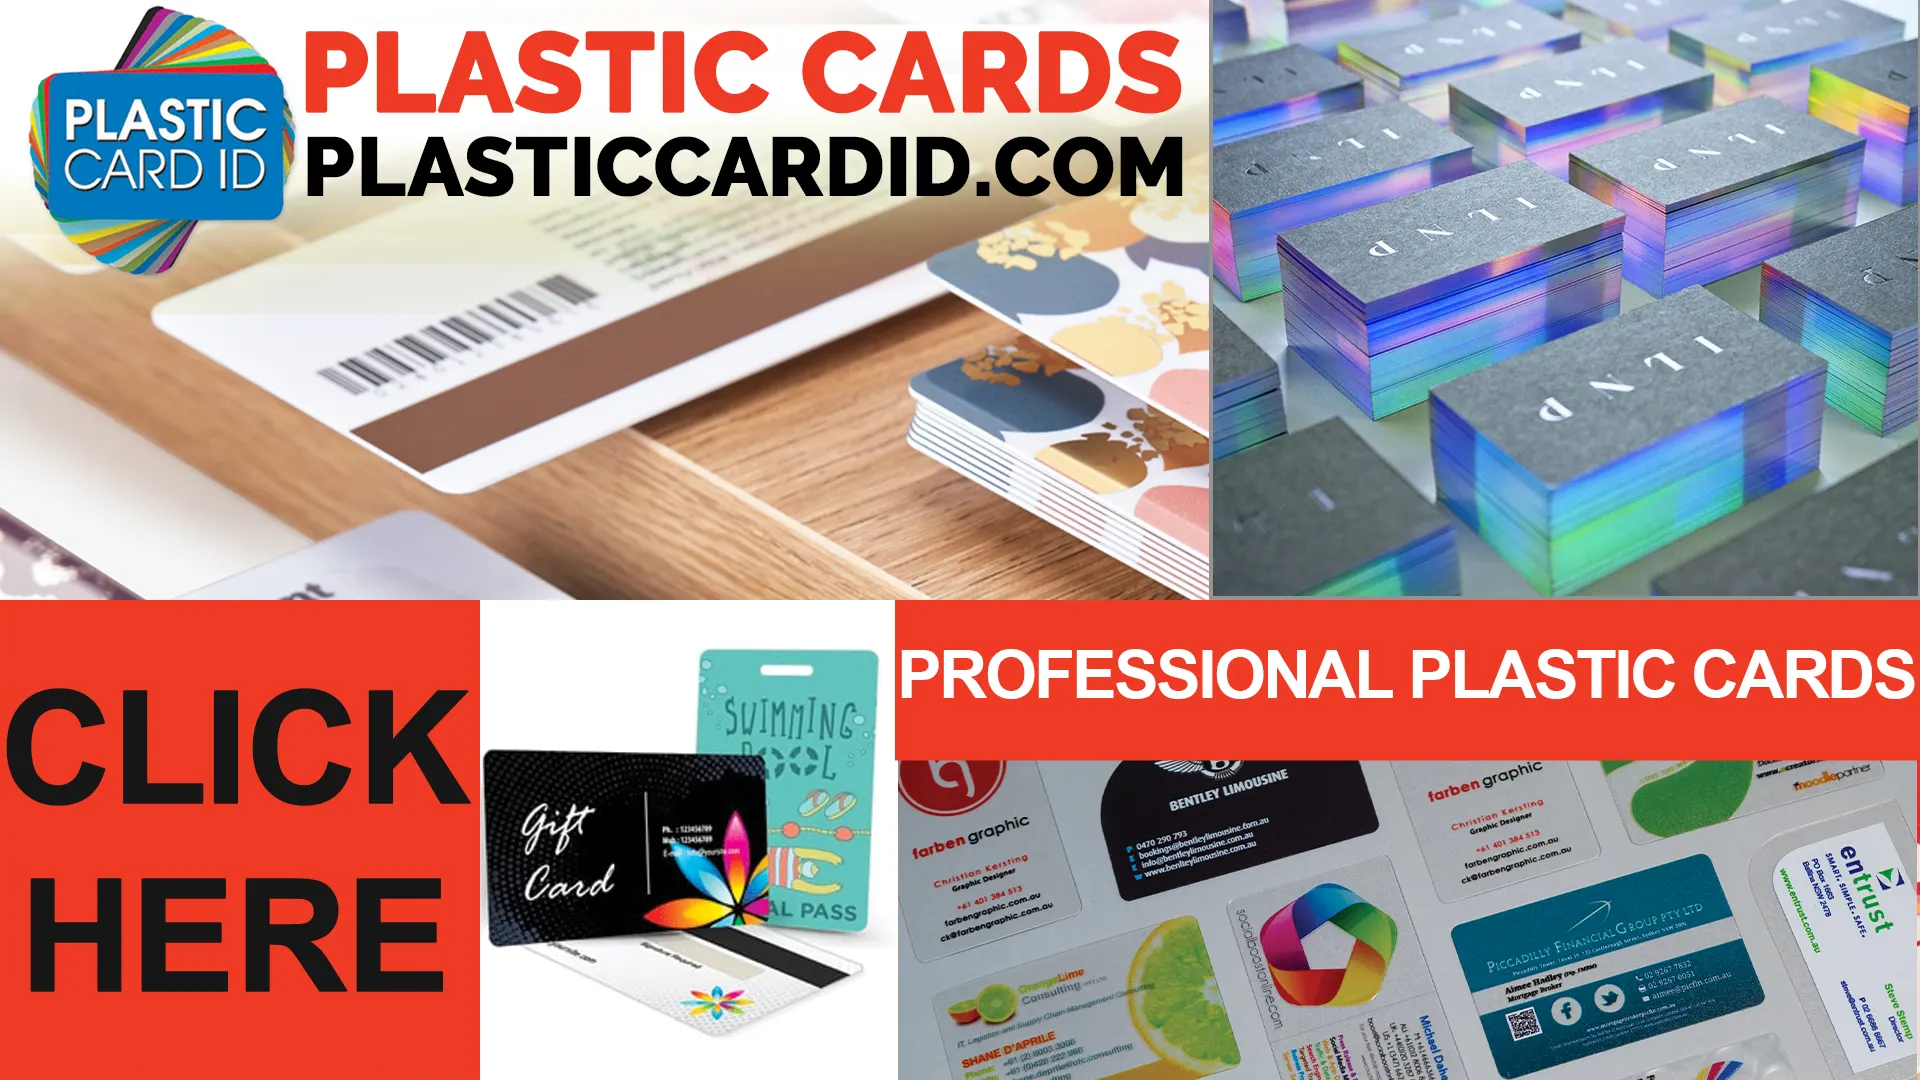 Leading the Way with Eco-Friendly Plastic Card Printing